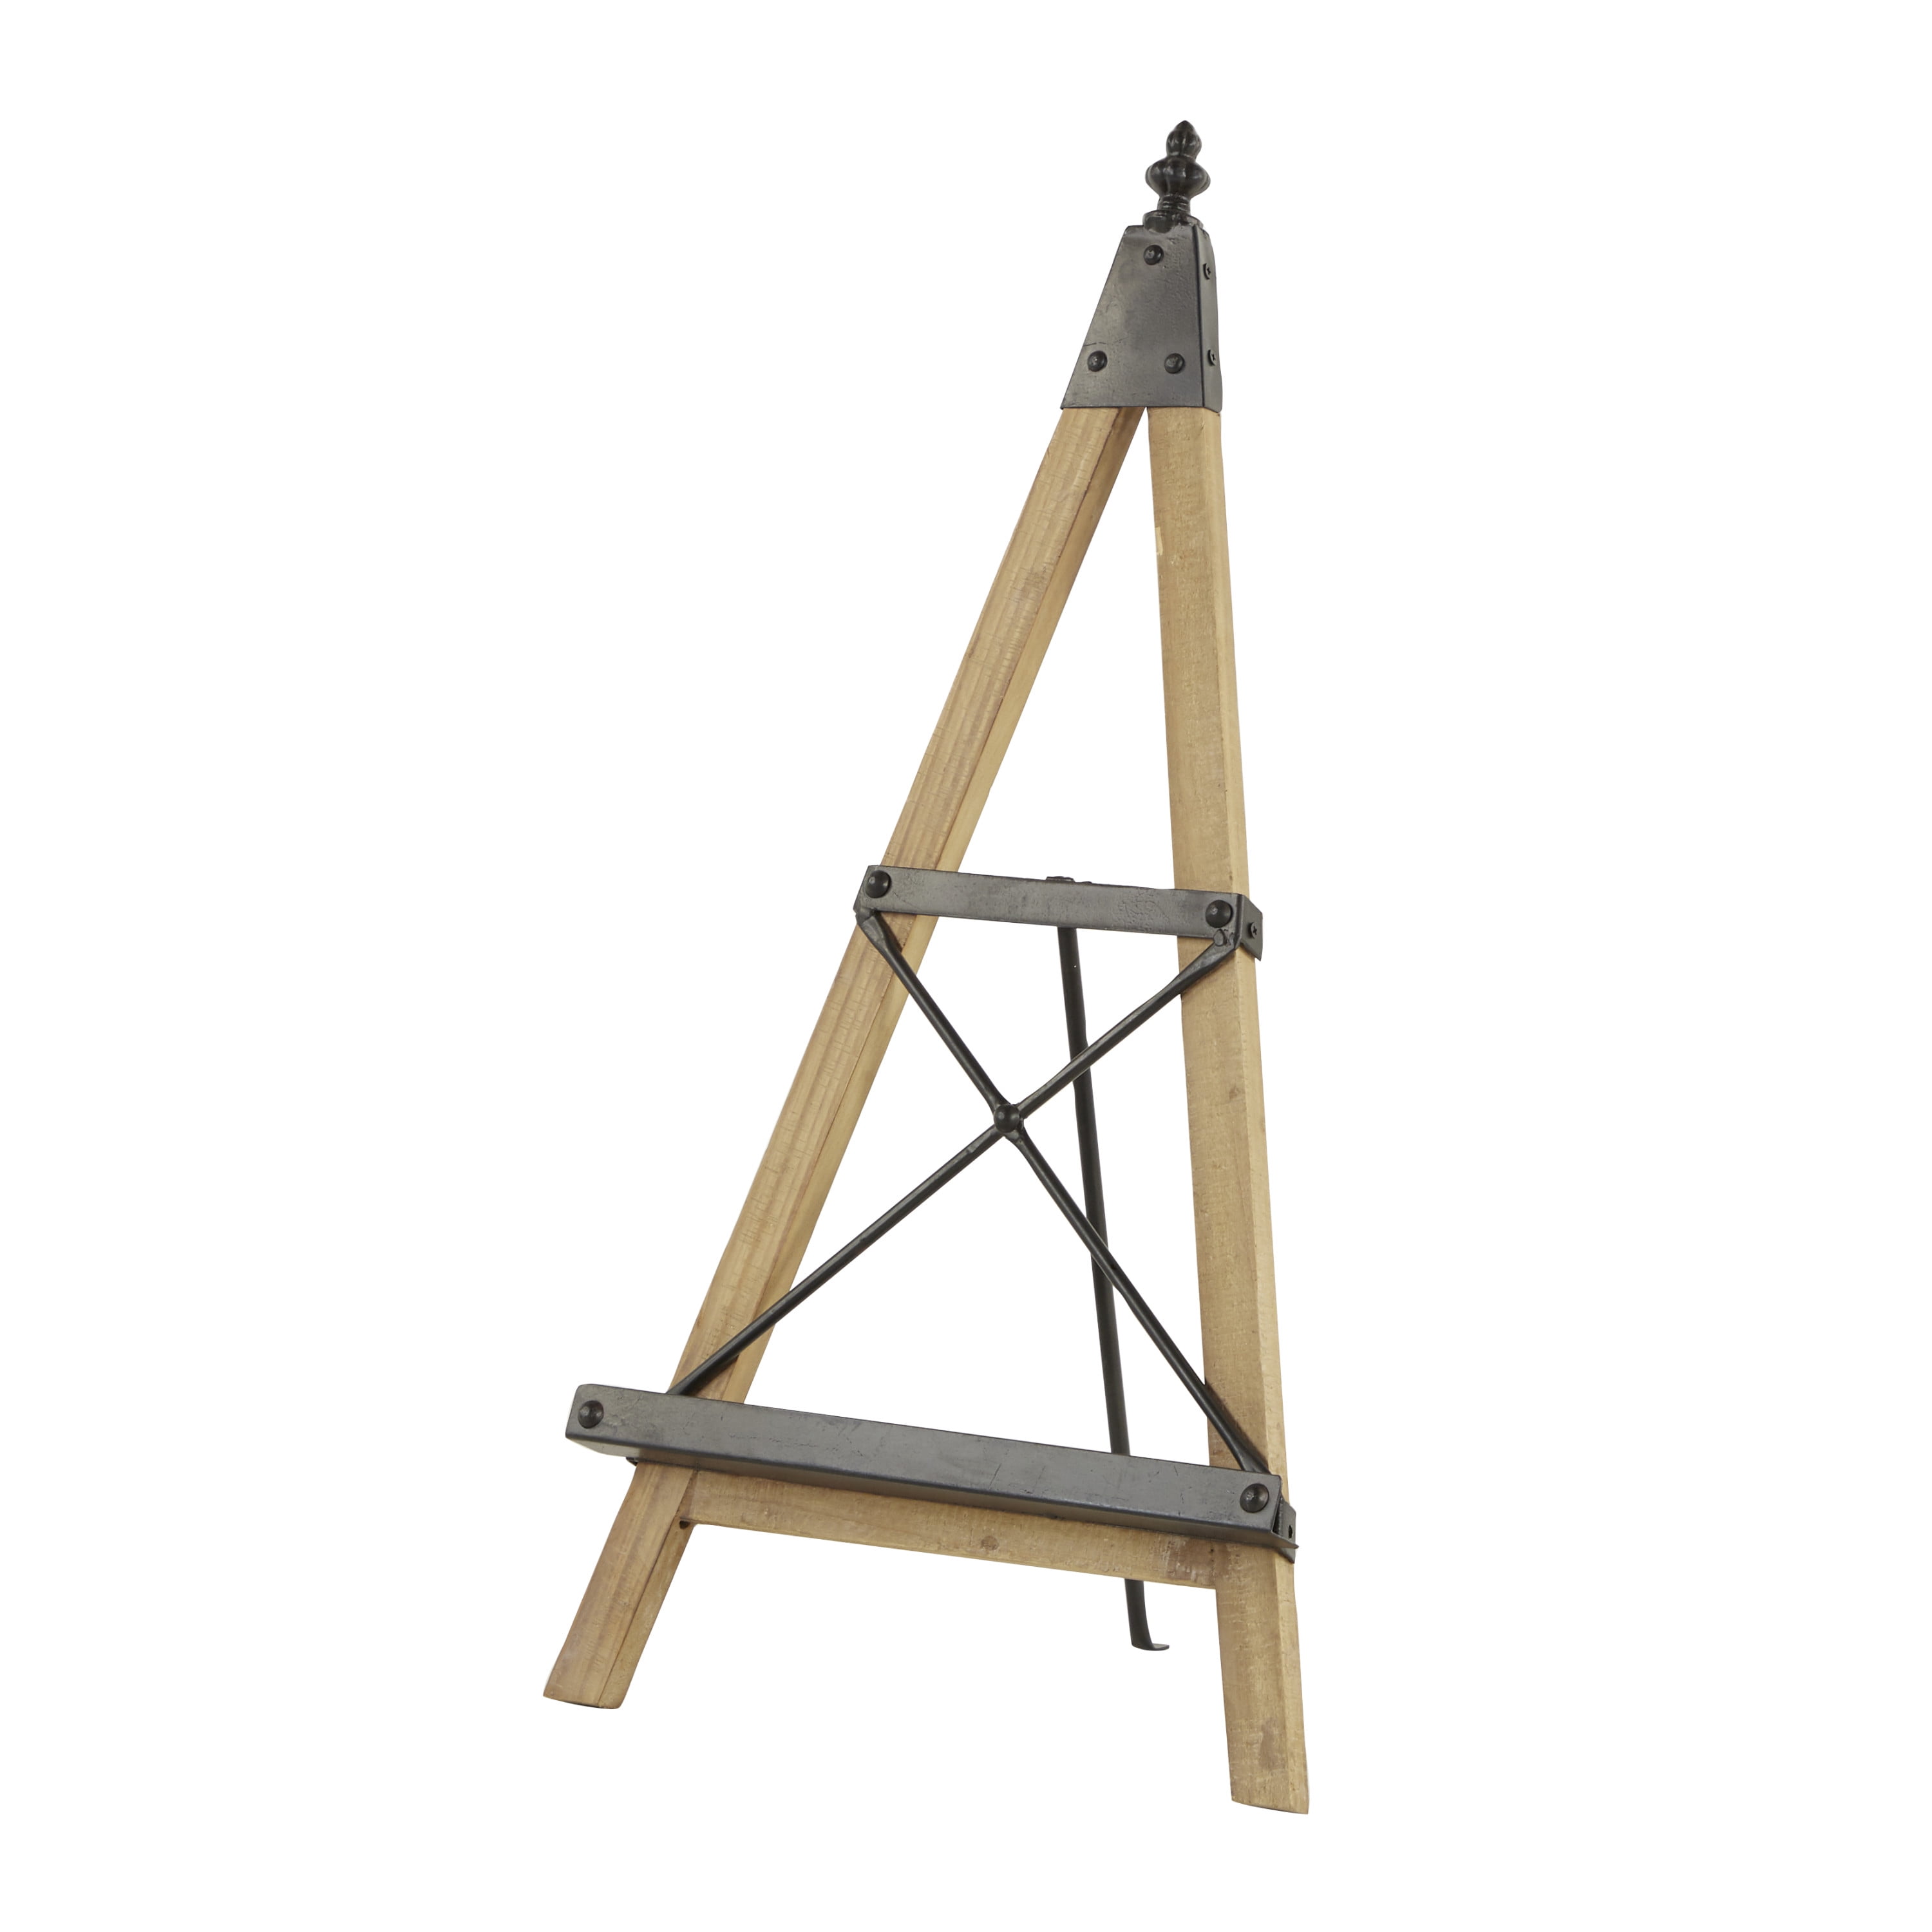  Red Co. Decorative Tripod Plate Stand and Art Holder Easel in  Gold Finish - 14 h : Home & Kitchen